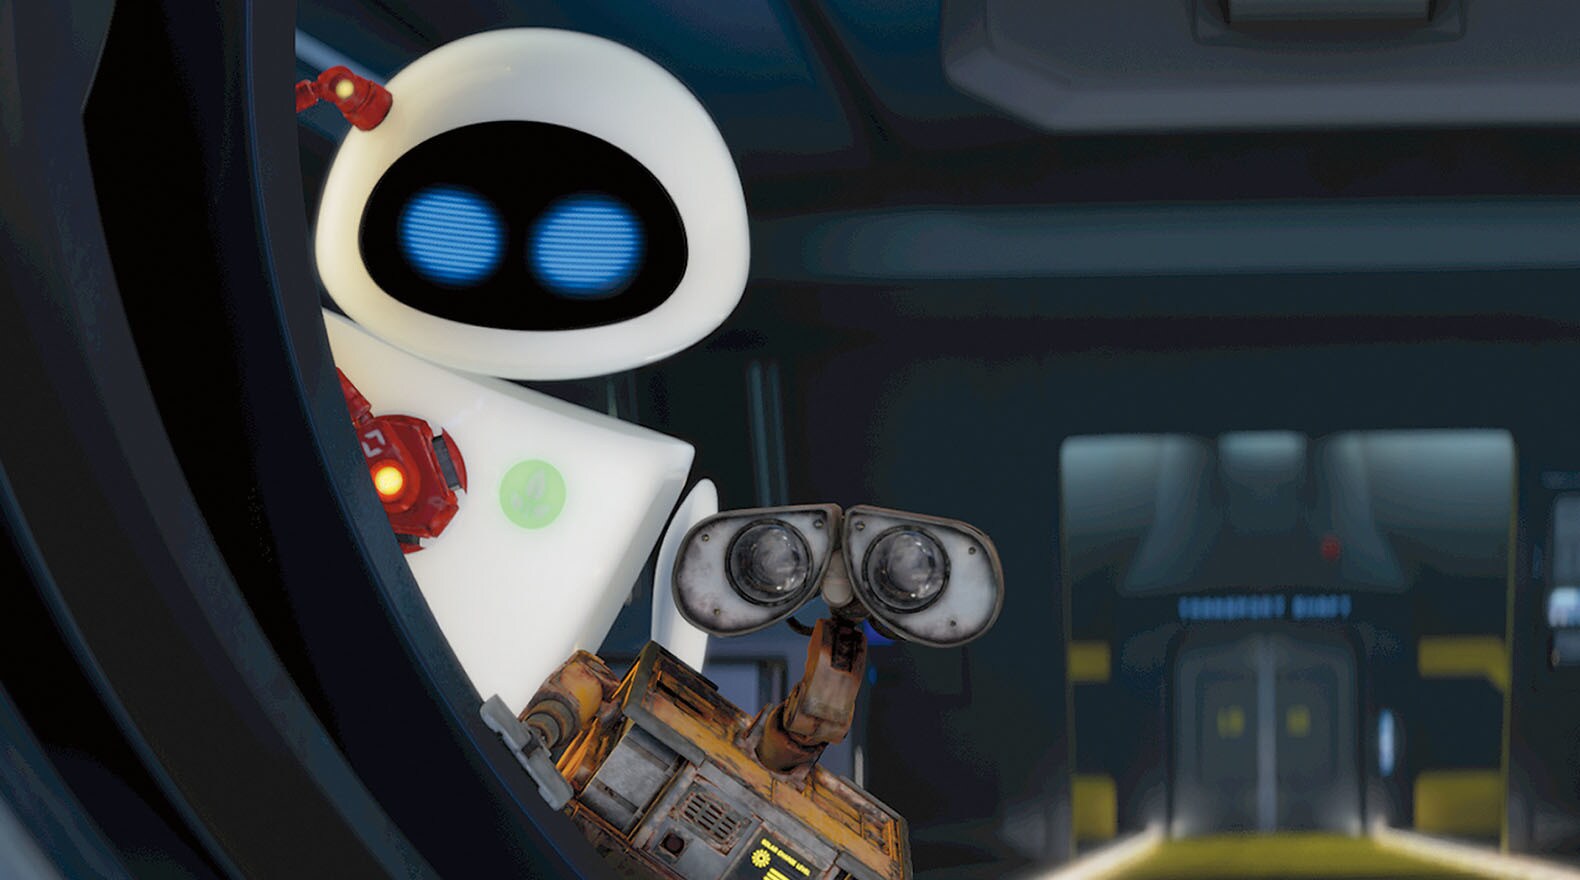 WALL•E and EVE: on a mission from the movie "Wall-E"